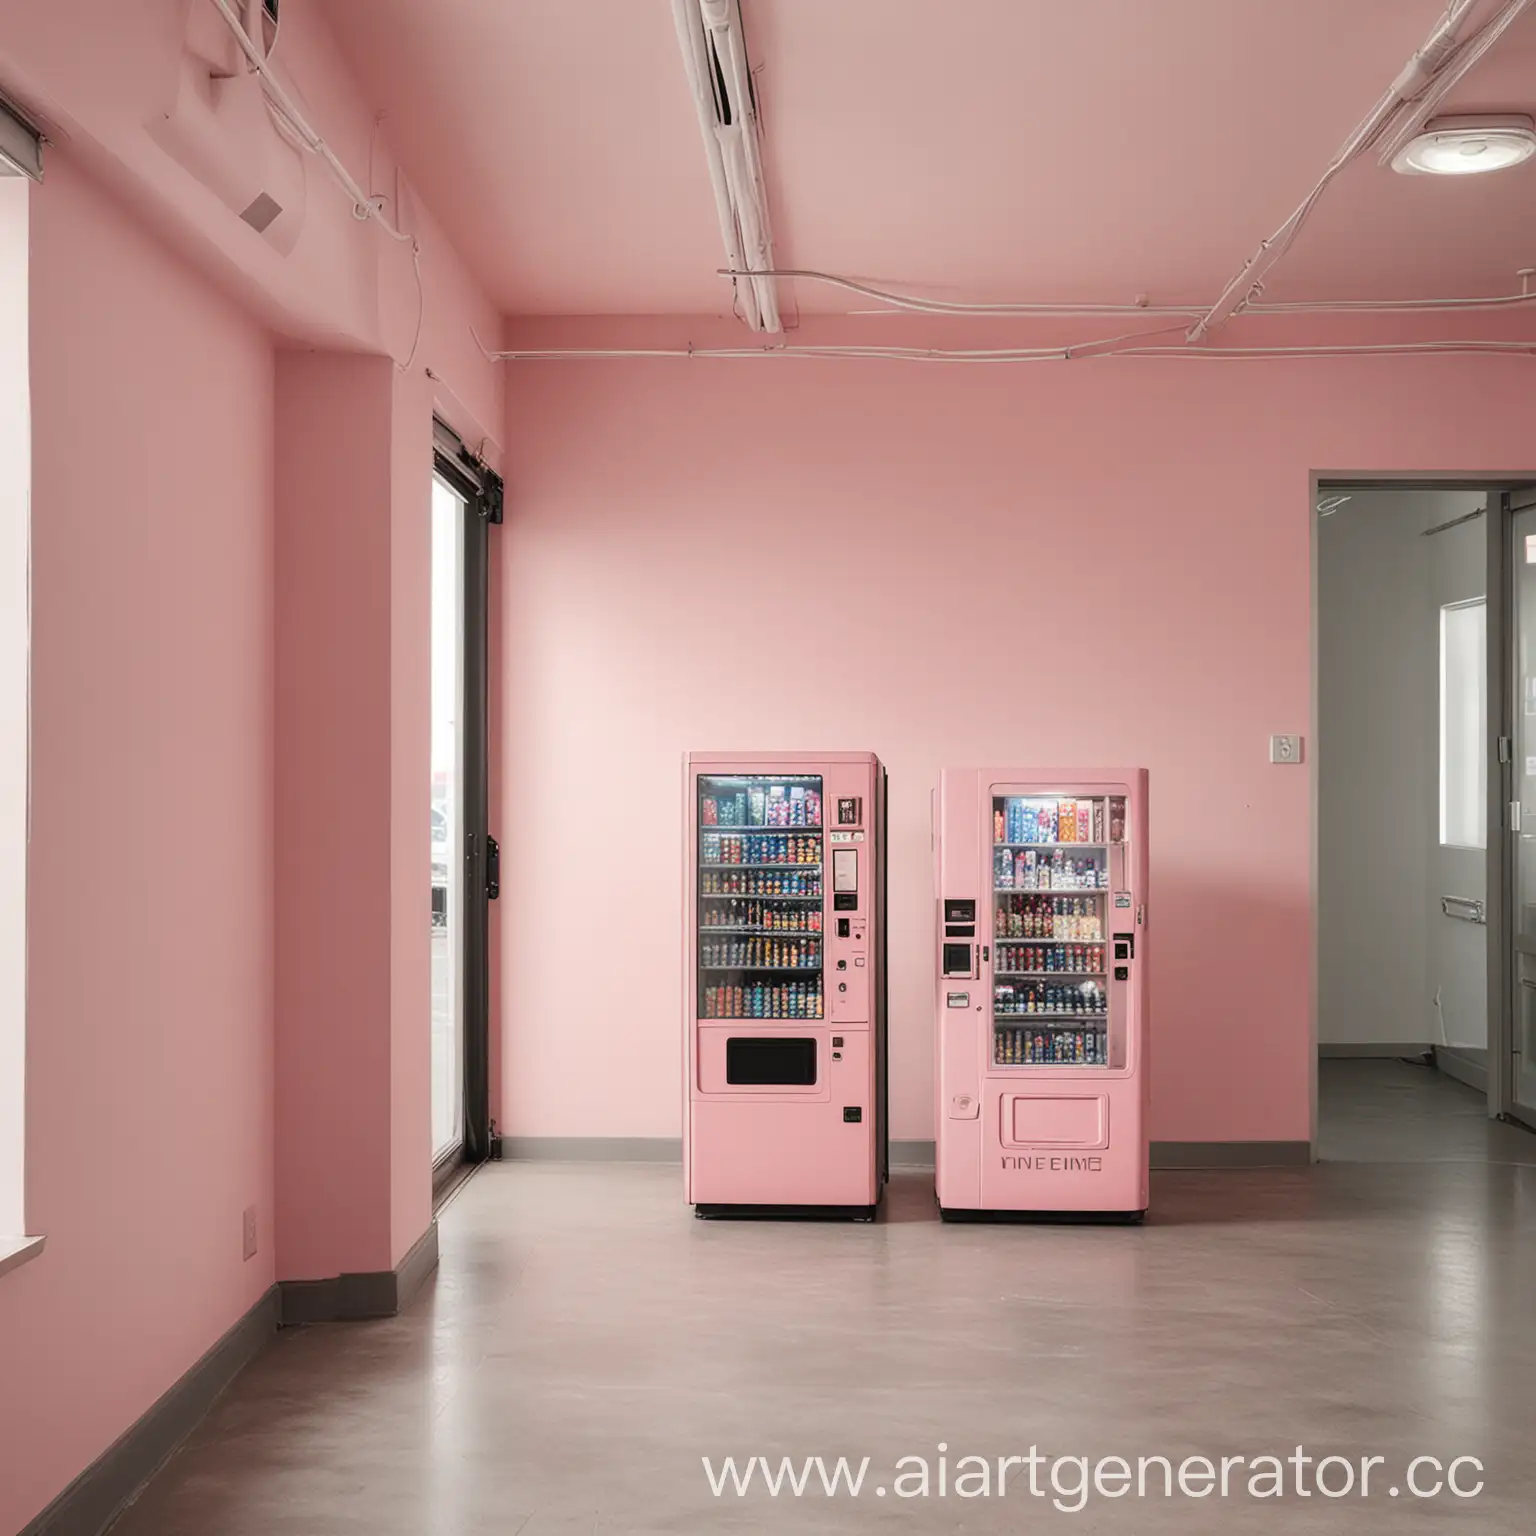 Coworking-Space-with-Pale-Pink-Walls-and-Vending-Machine-Snacks